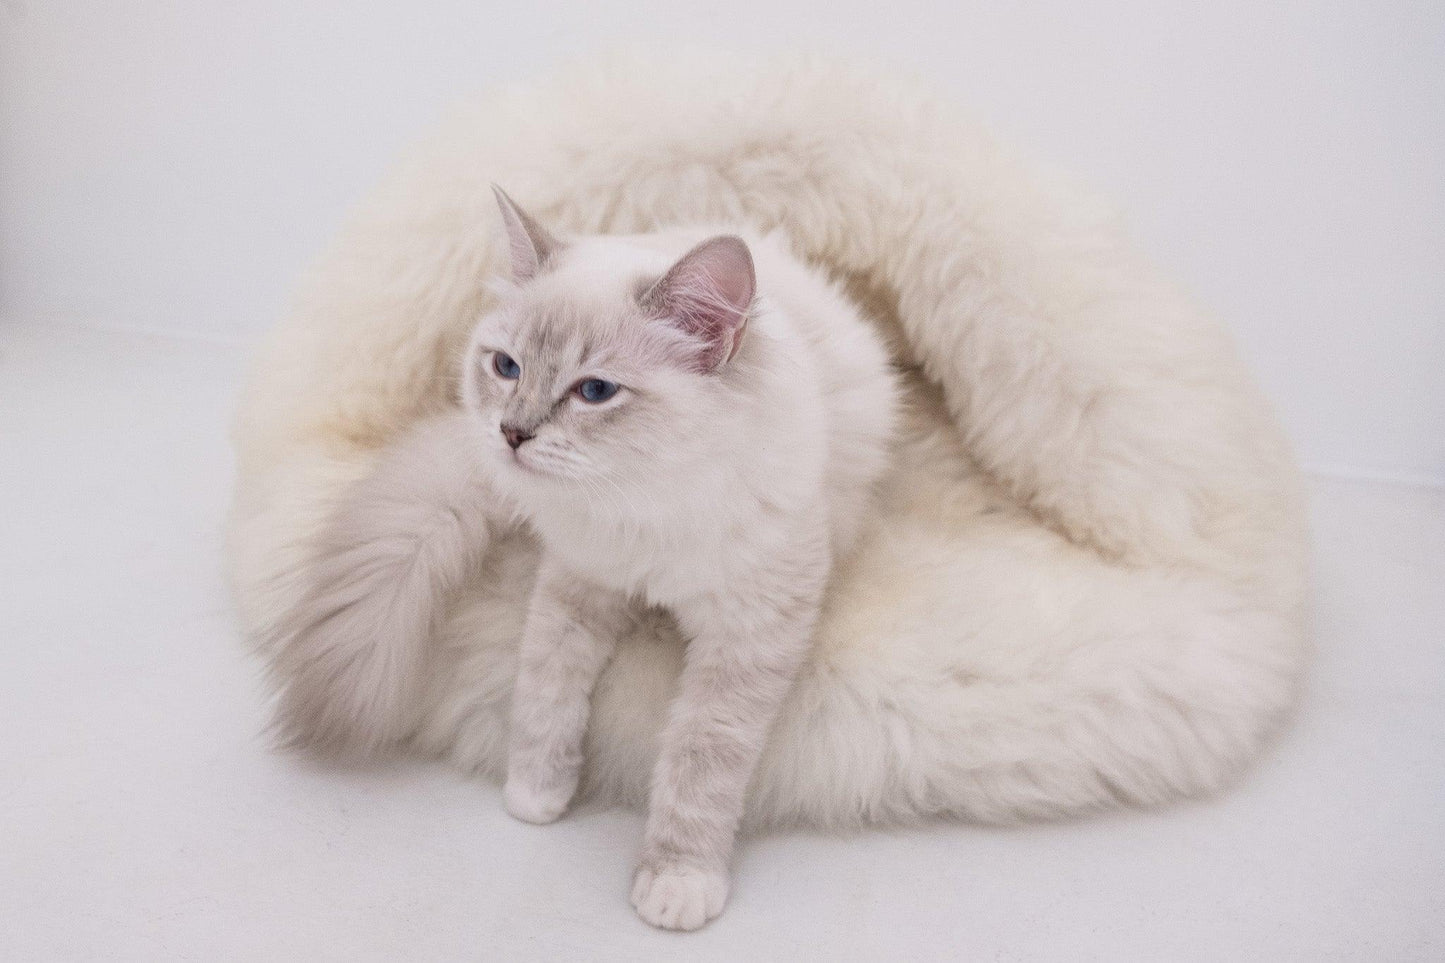 A white cat lounging on a fluffy Natural Sheepskin Pet Cave - White bed from Mellow Pet Store.